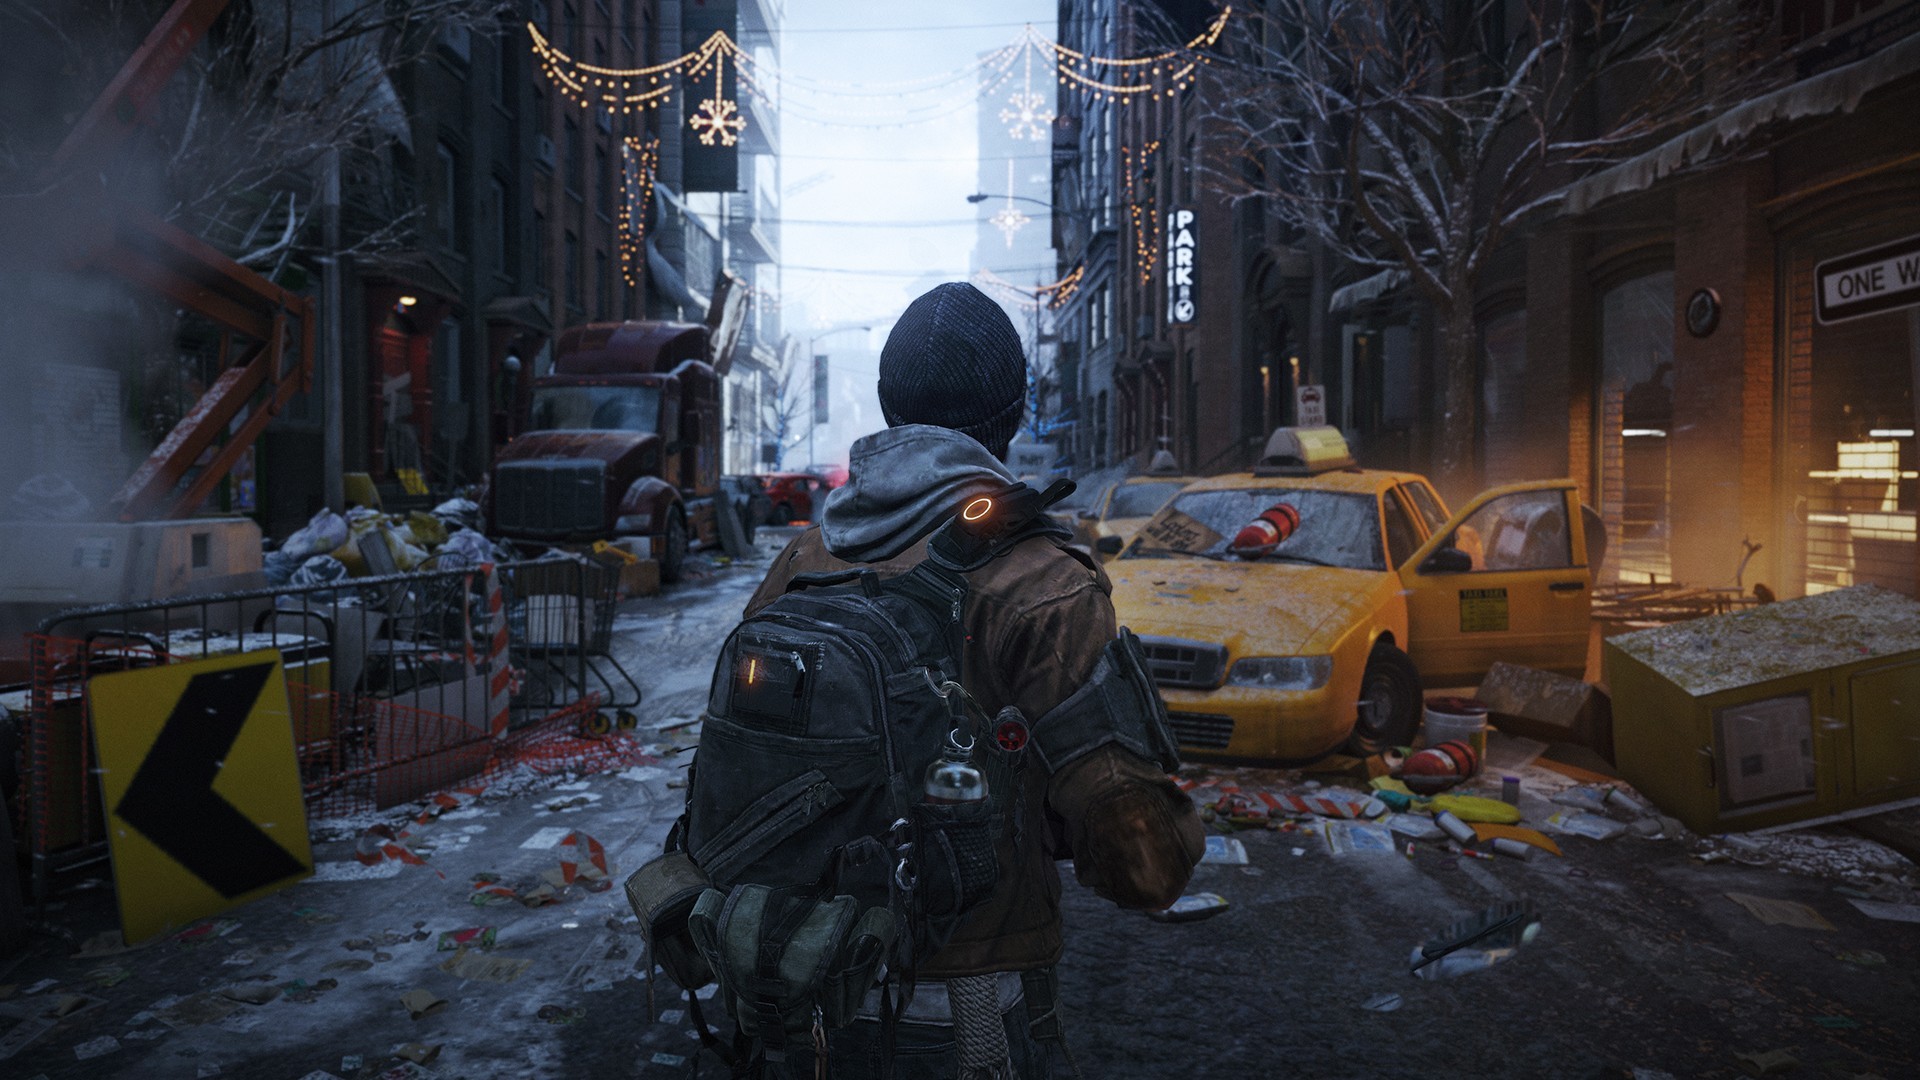 General 1920x1080 video games Tom Clancy's The Division PC gaming video game art apocalyptic